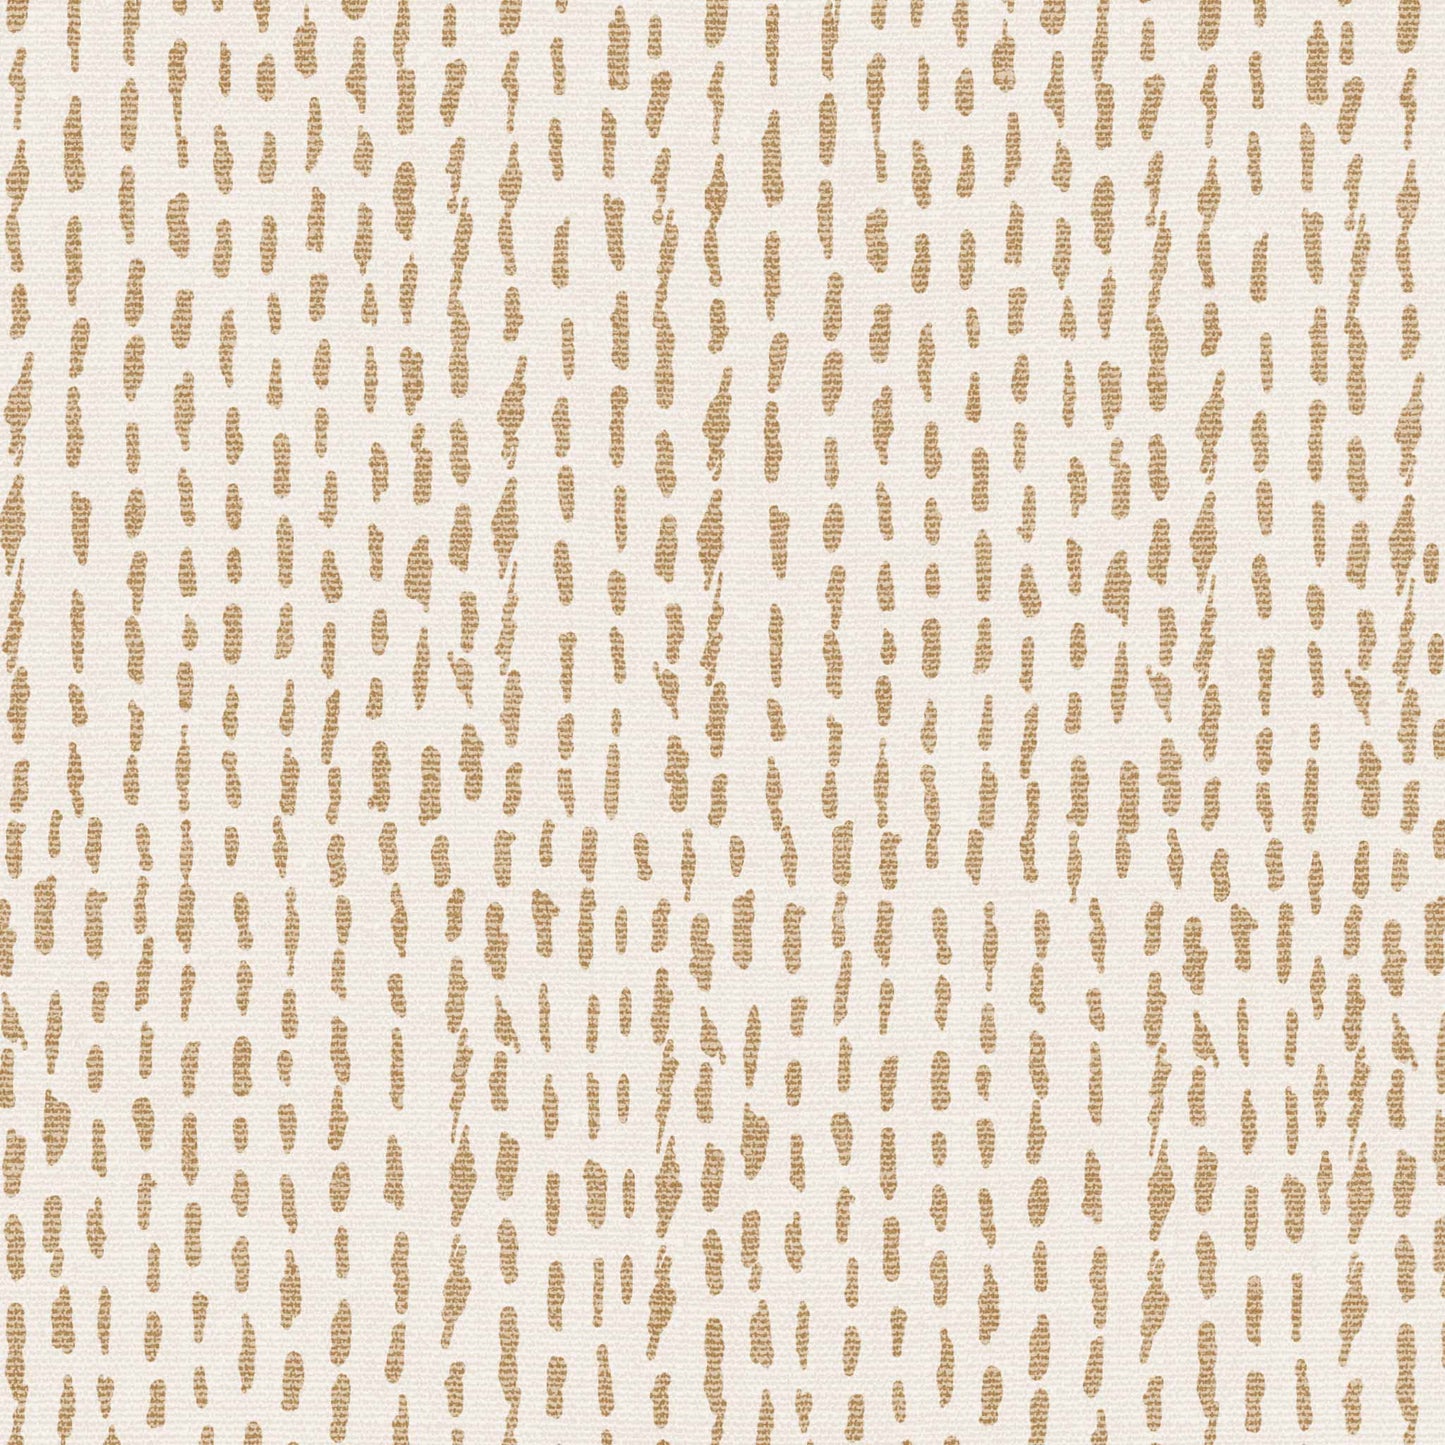 Brighten up your walls with this Freehand Dashes Wallpaper — the perfect mix of cream. With freehand dashes, this wallpaper can liven up any space, adding unique depth to the room. Great in boys bedroom or office.